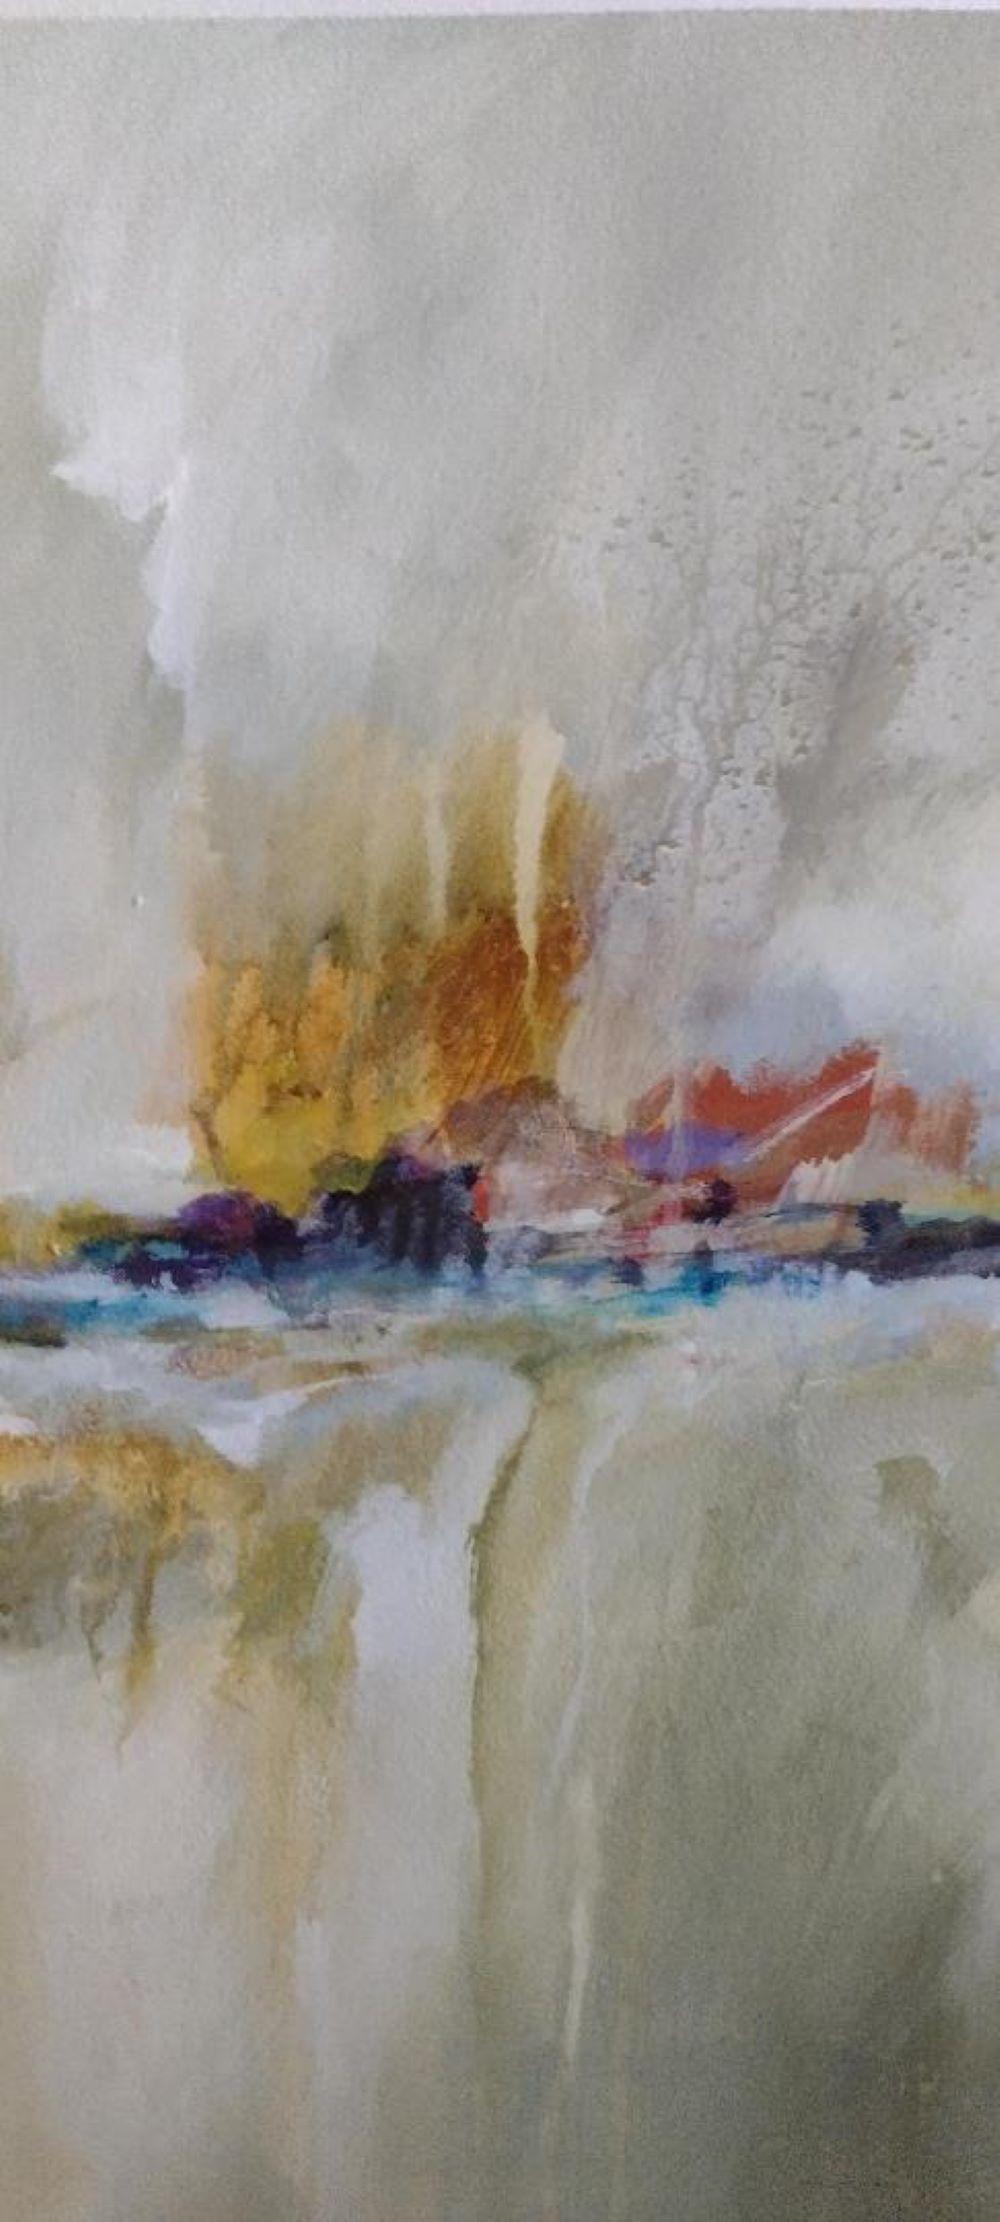 Flow - Original abstract, rich colors on soft off-white and gray background - Painting by Lun Tse 